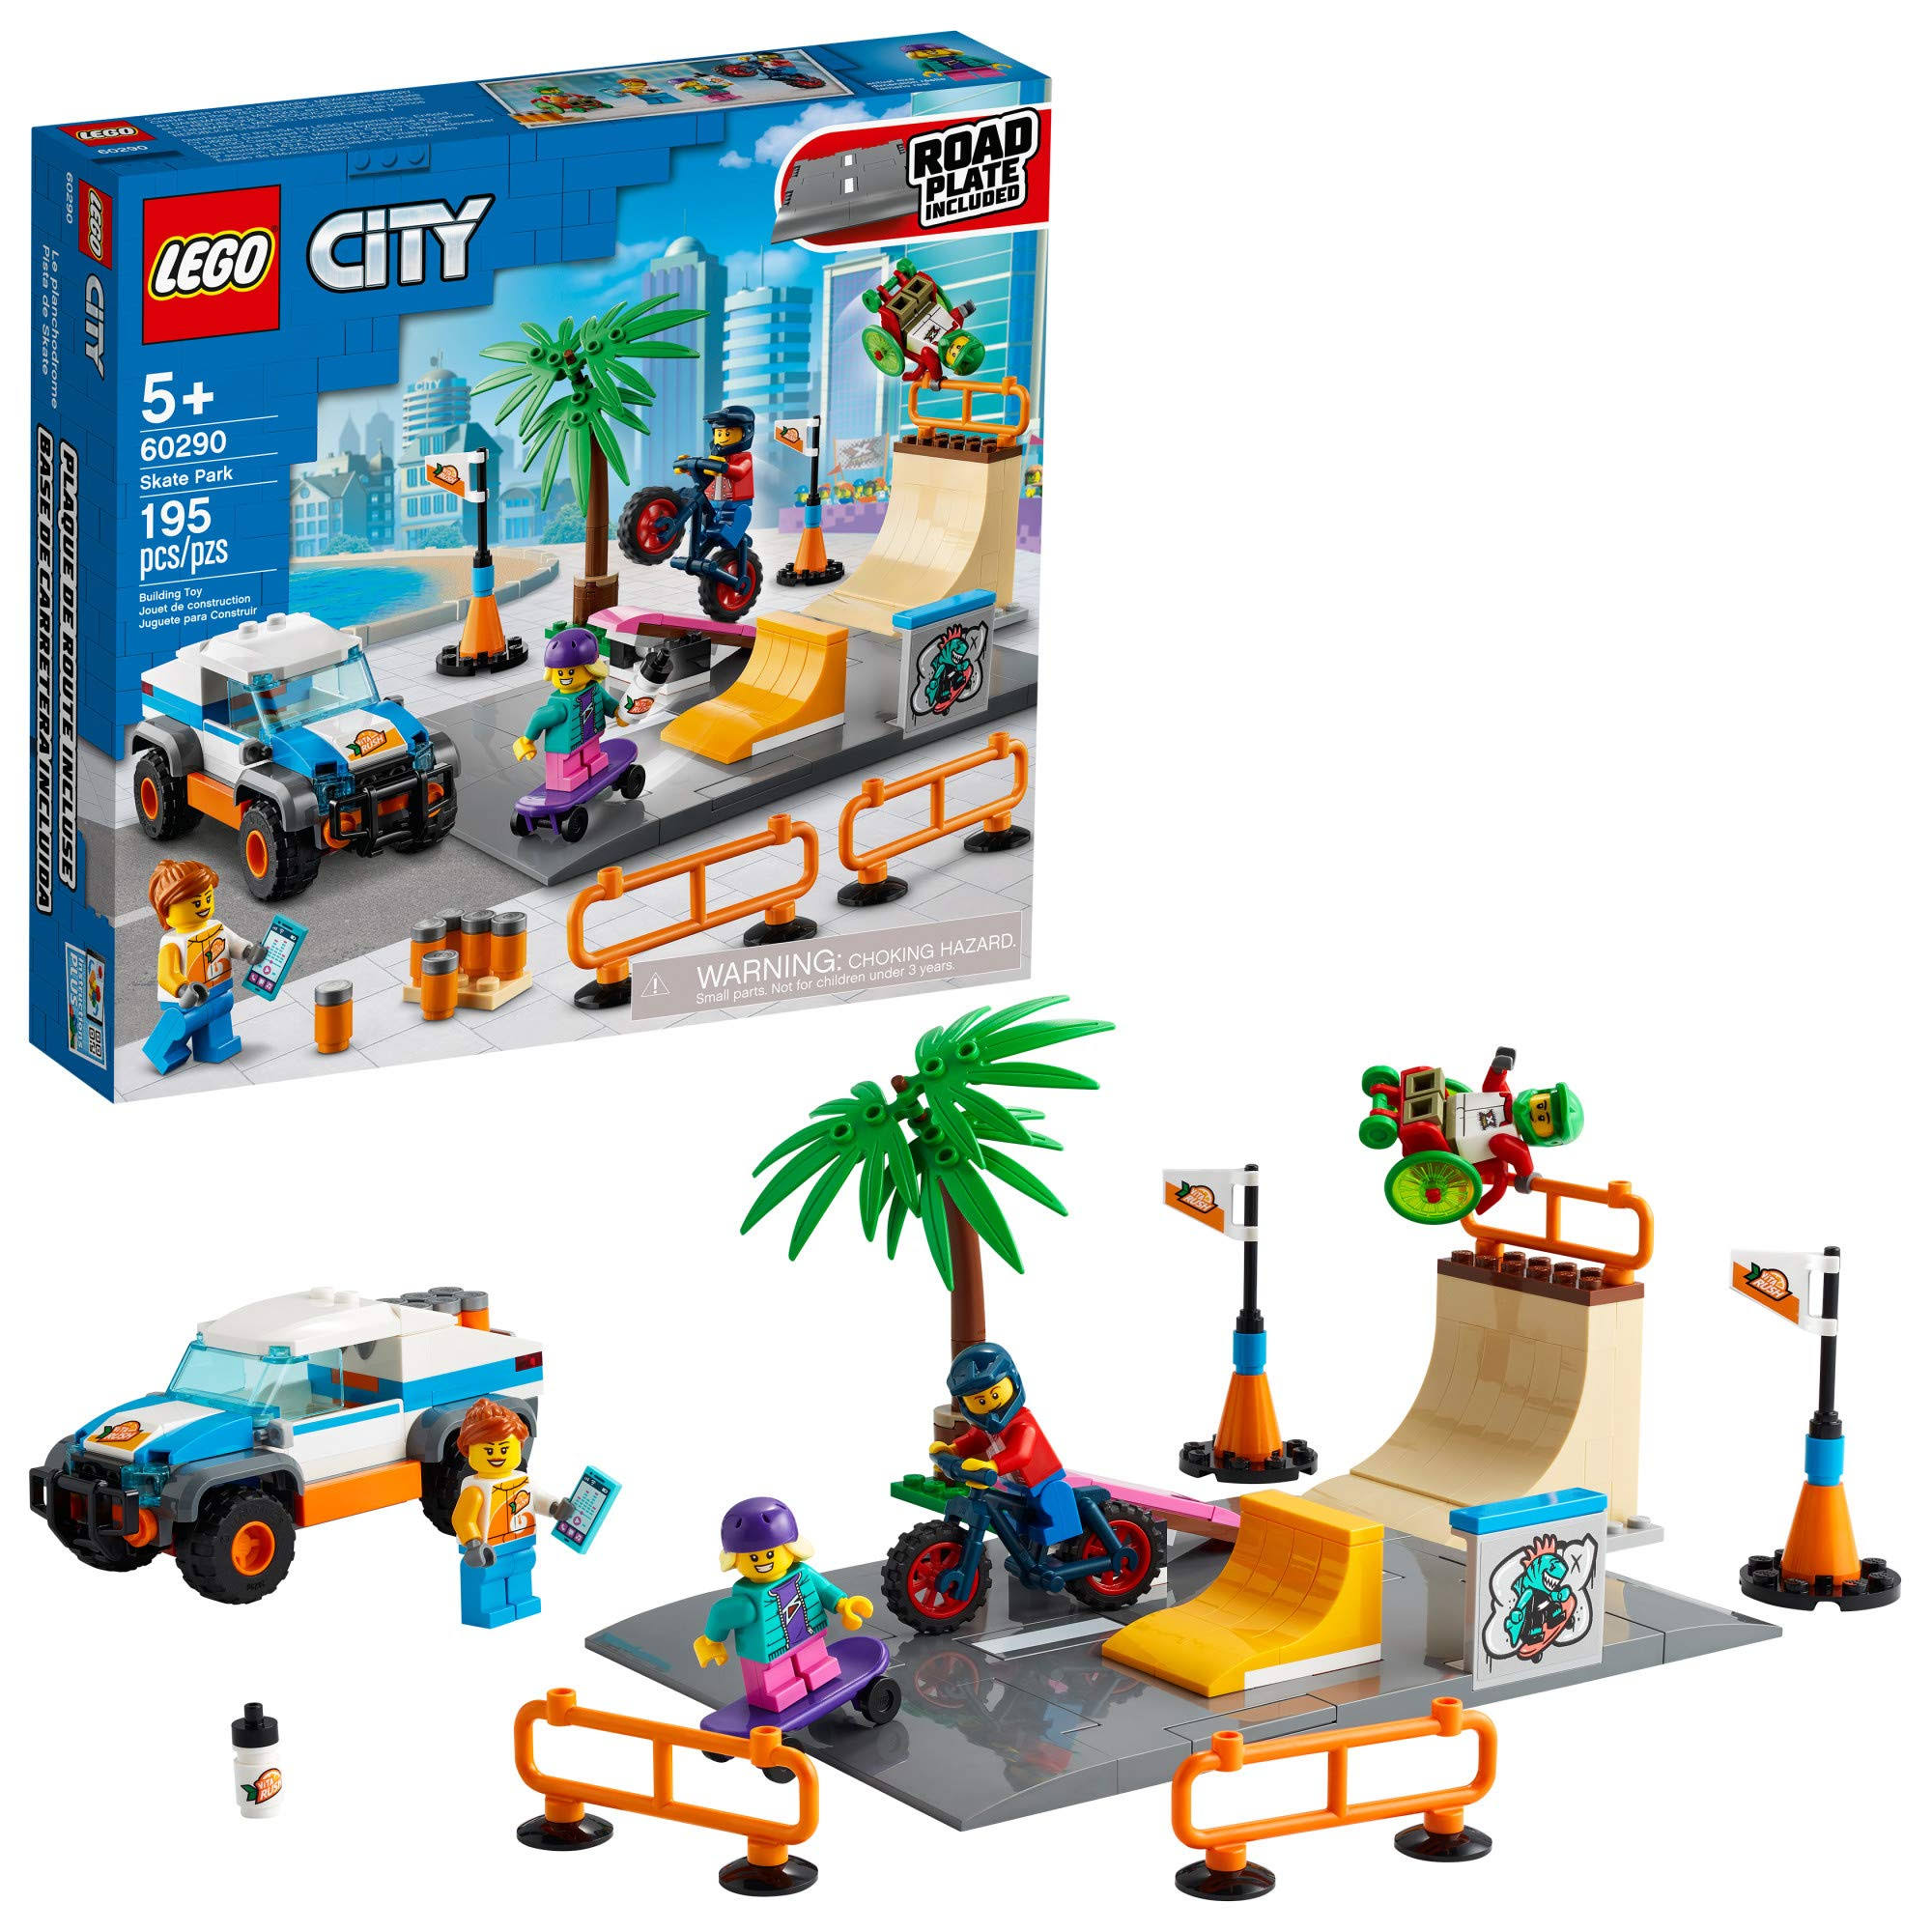 LEGO City Skate Park 60290 Building Kit; Cool Building Toy for Kids, New 2021 (195 Pieces)